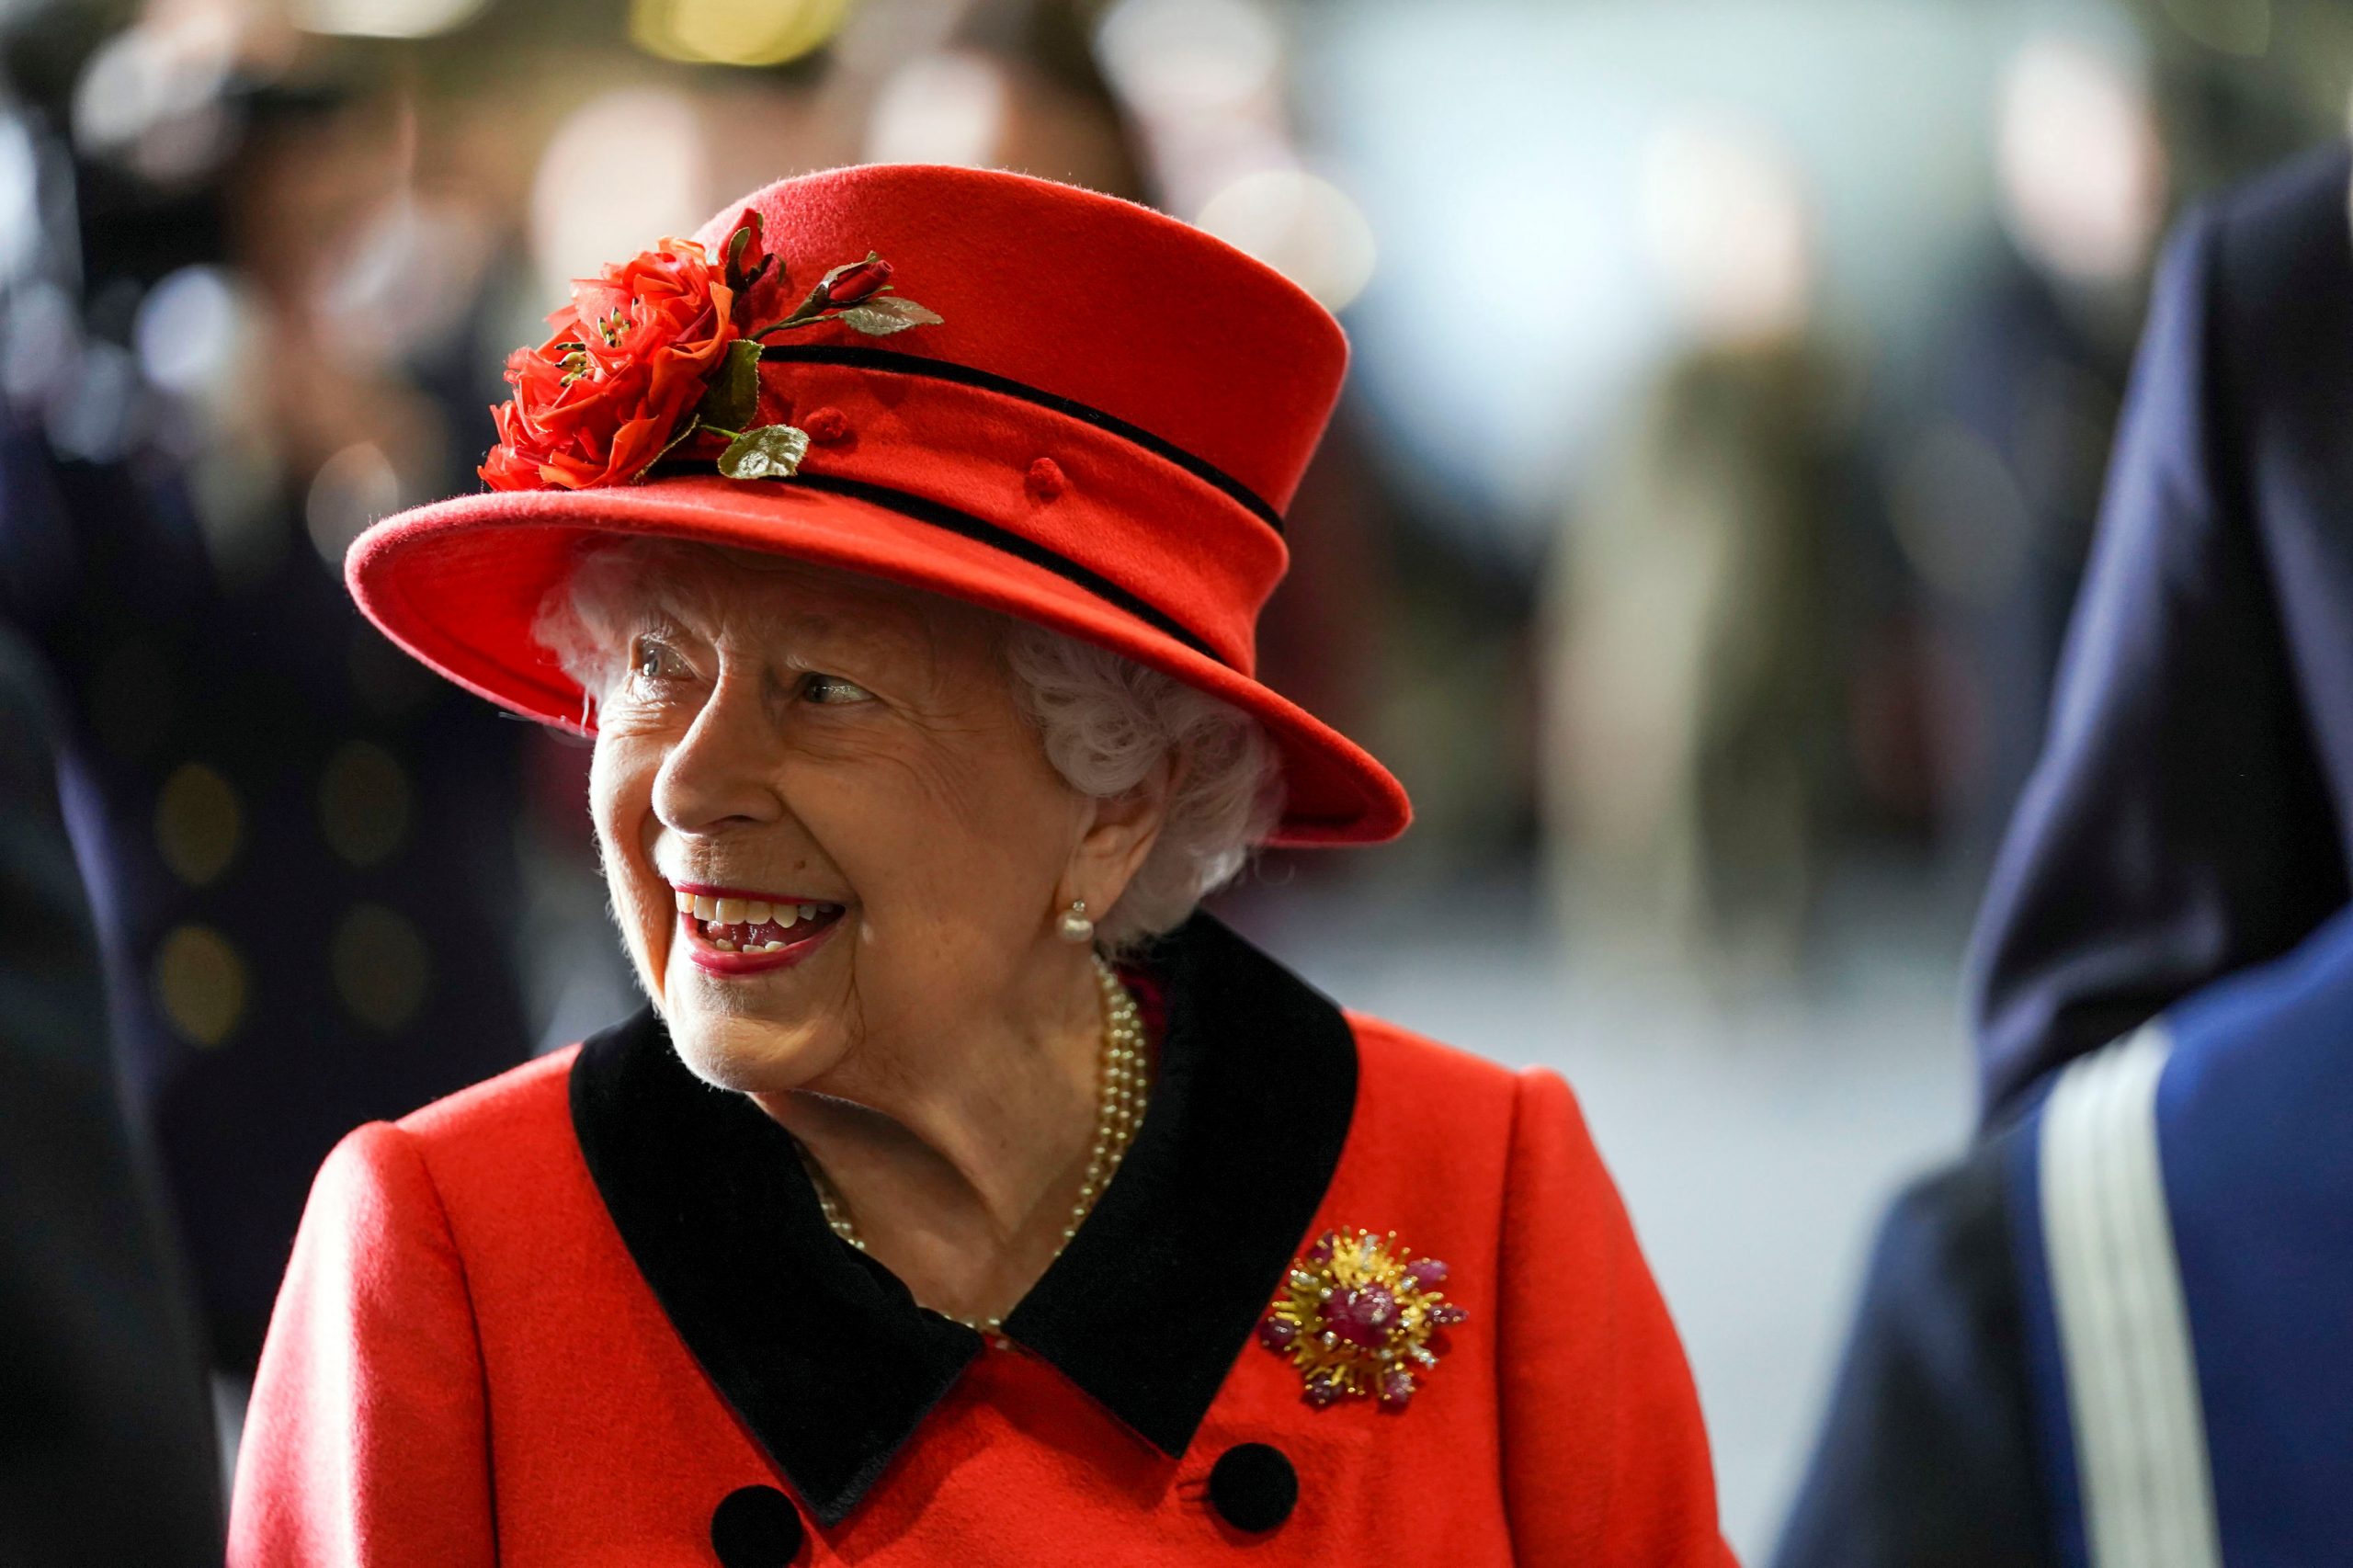 Queen continues her vacation even after castle worker tests COVID positive